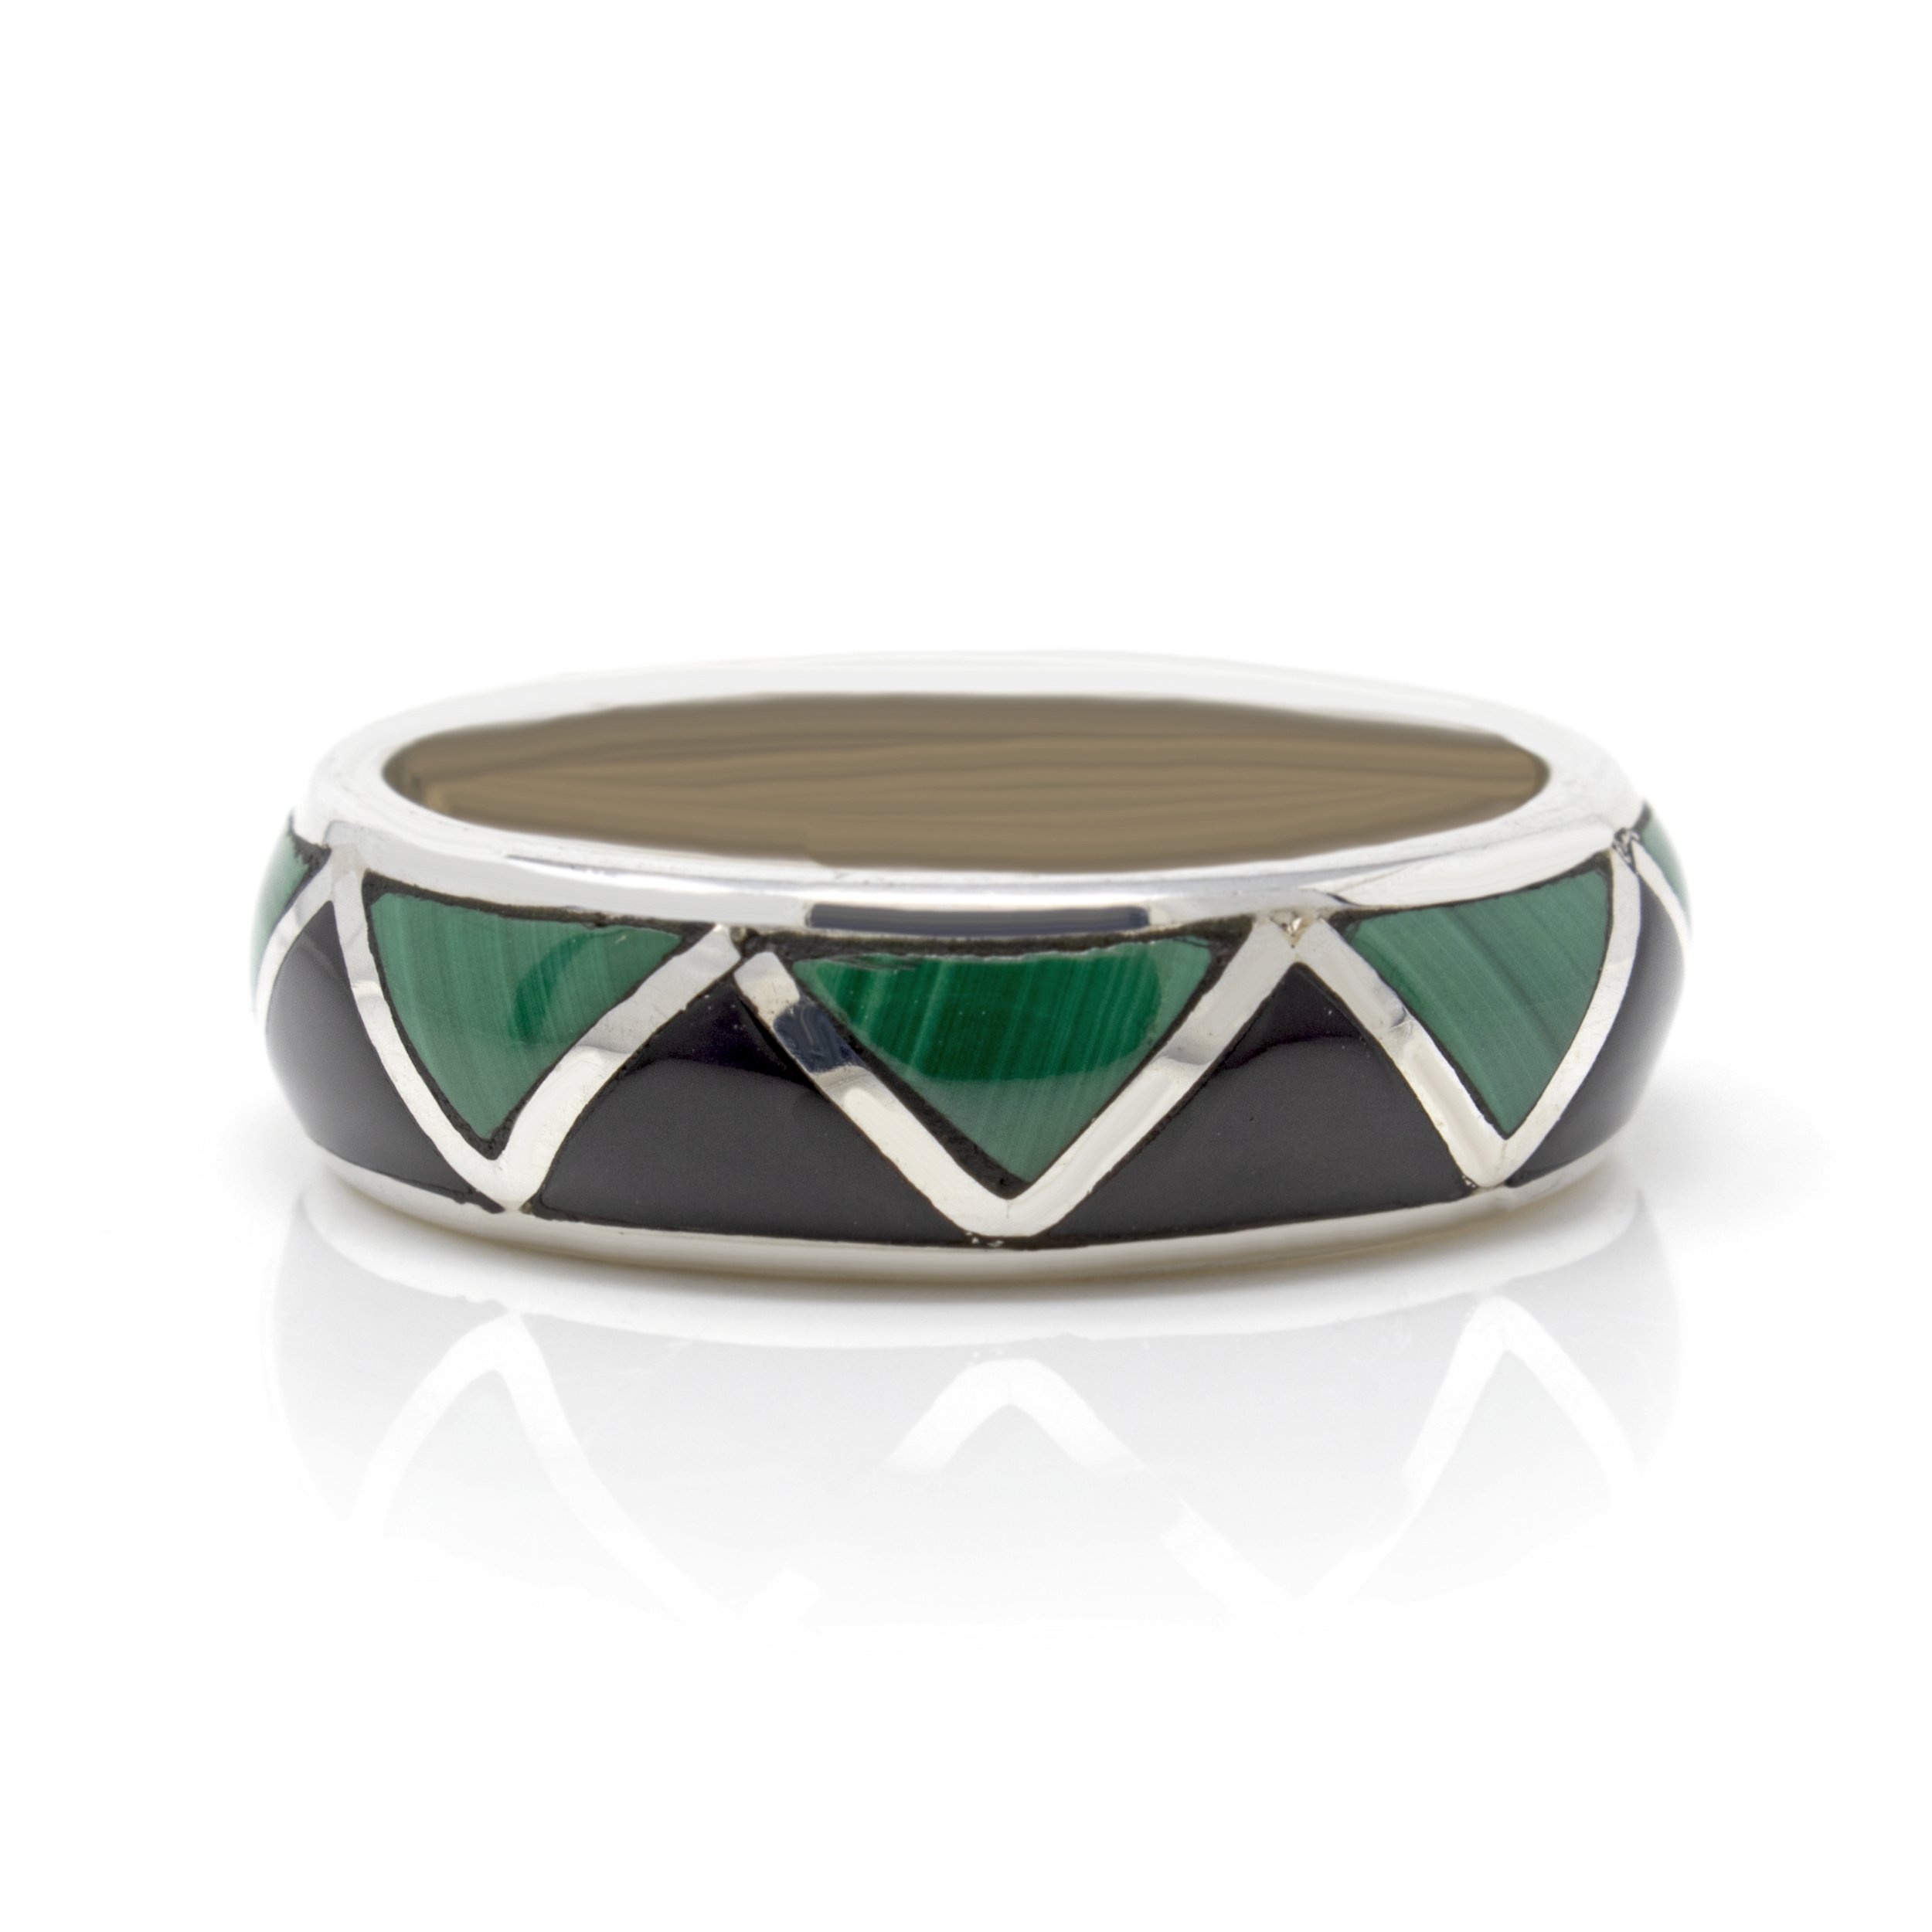 Black Onyx & Malachite Inlay Ring Size 12 - All Around Triangle Inlay With Silver Zig-zag Channeling